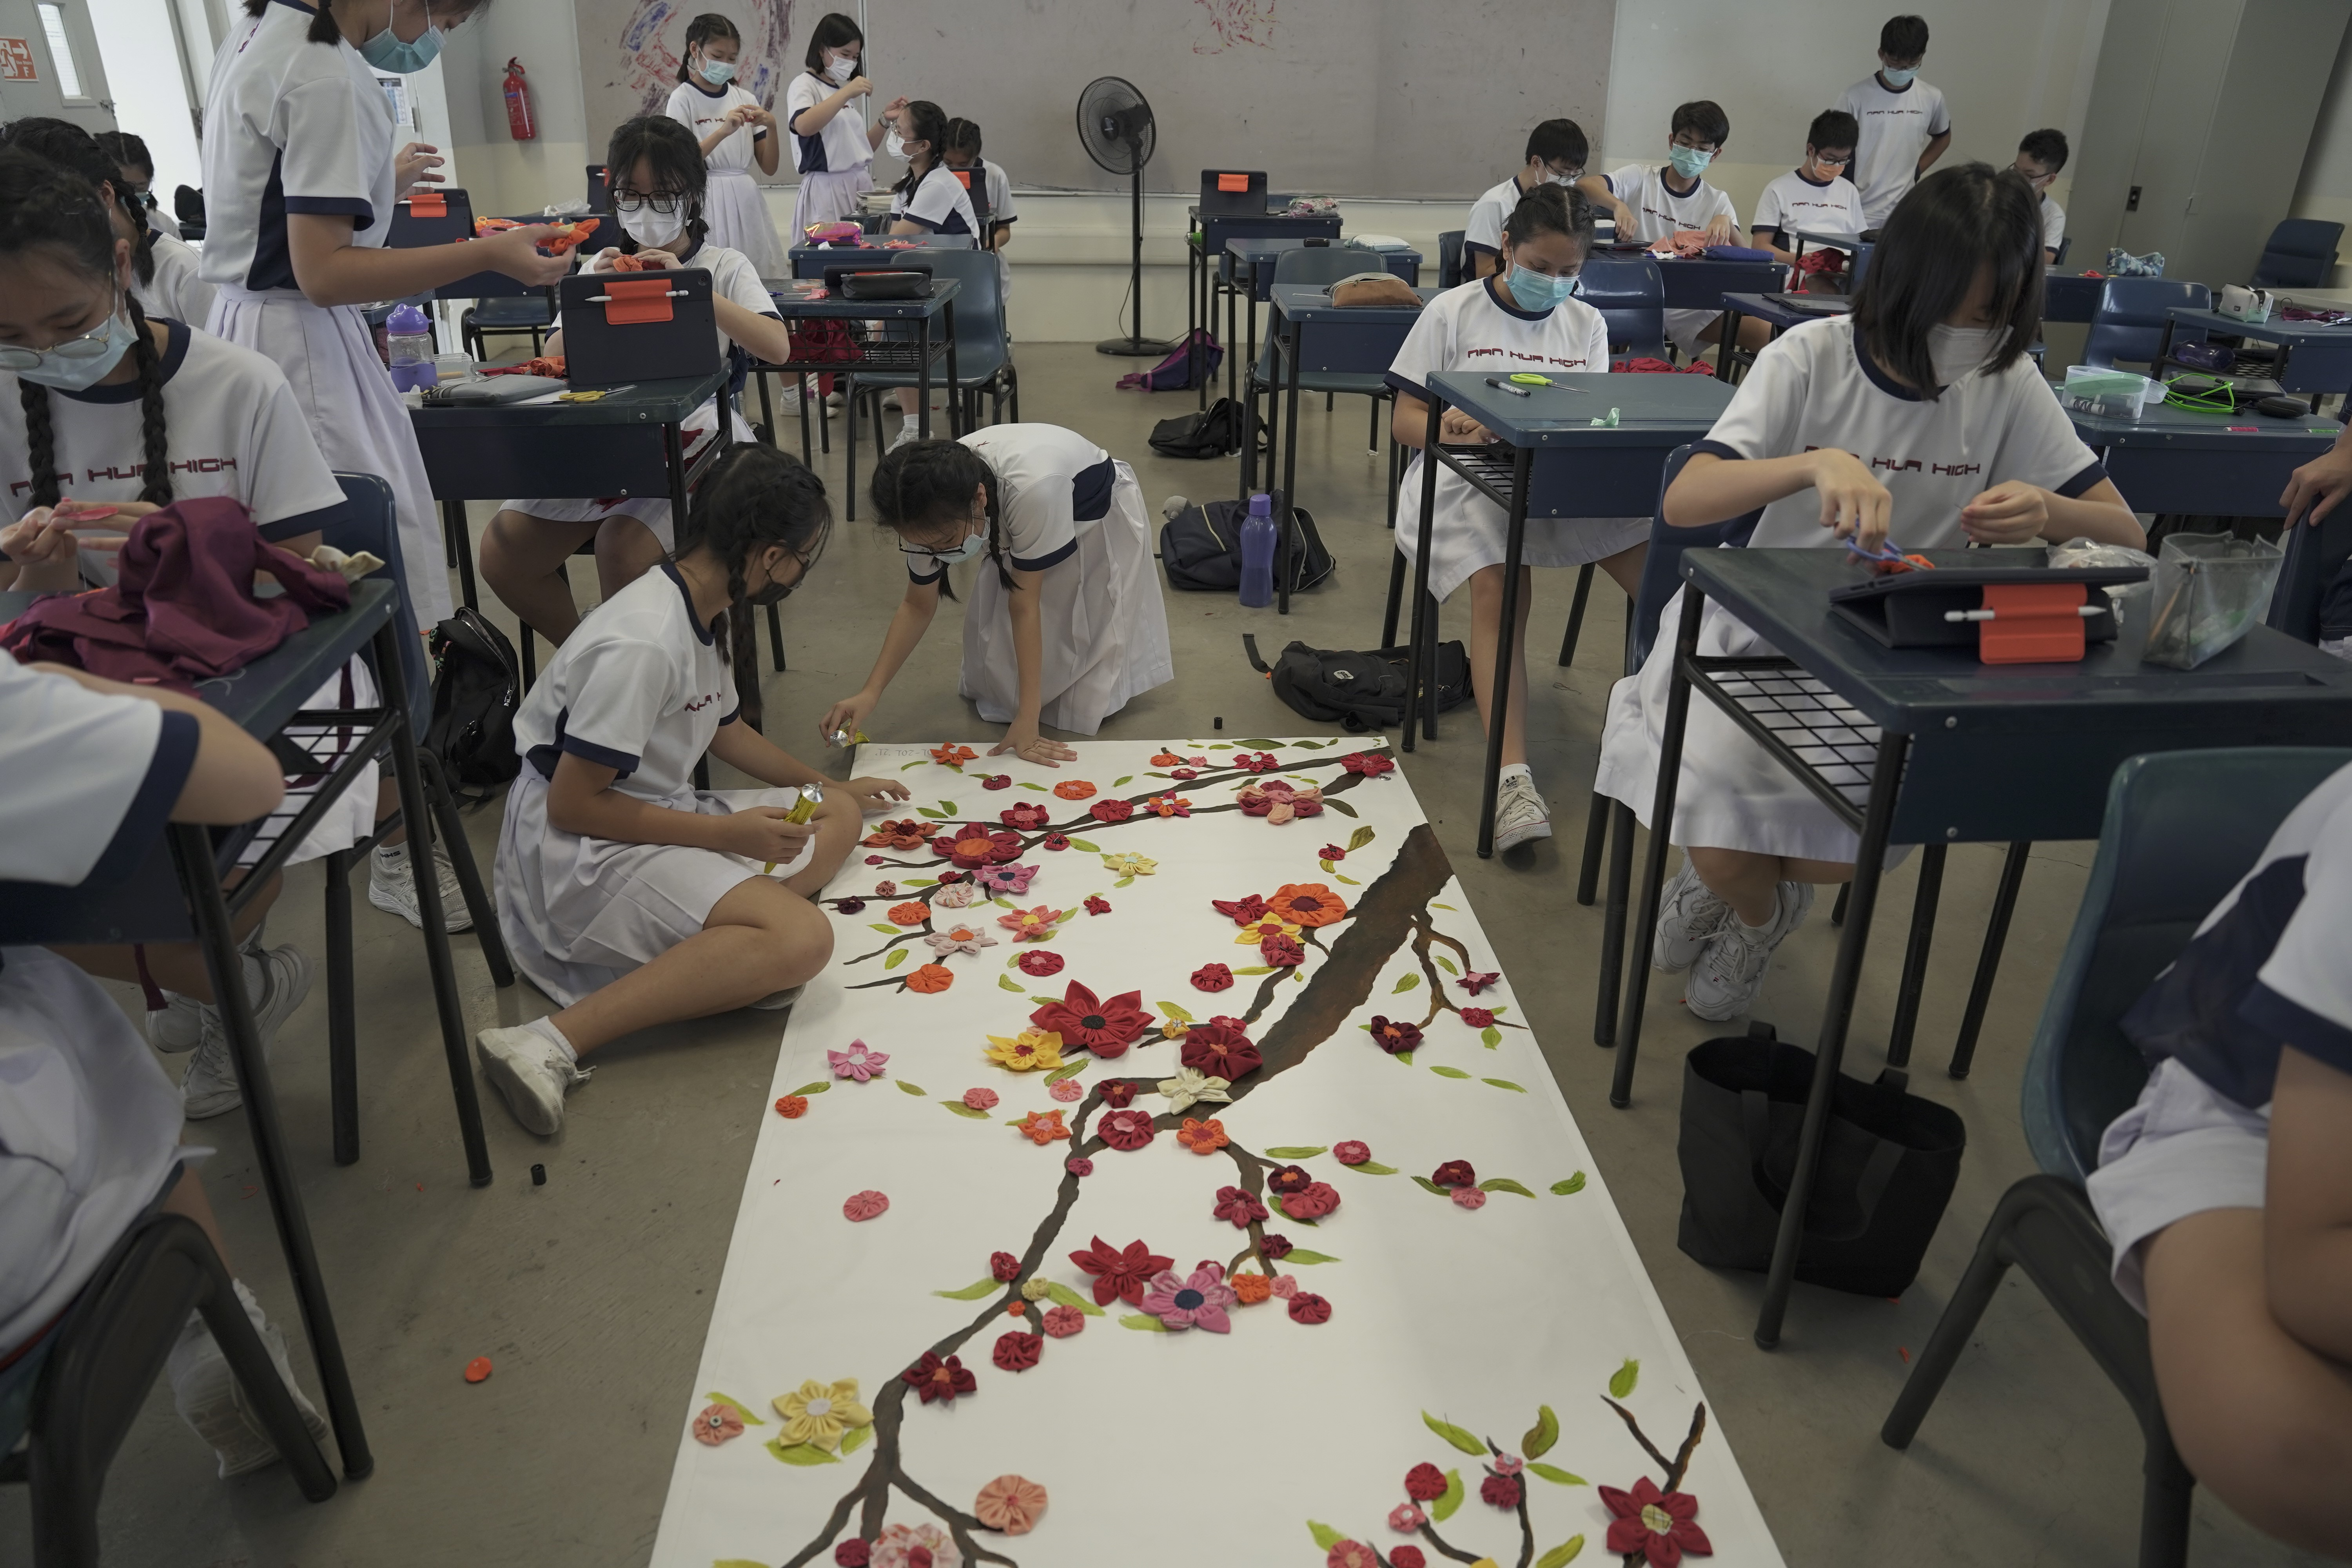 Secondary 2 students placing fabric flowers on canvas for Artsfest 